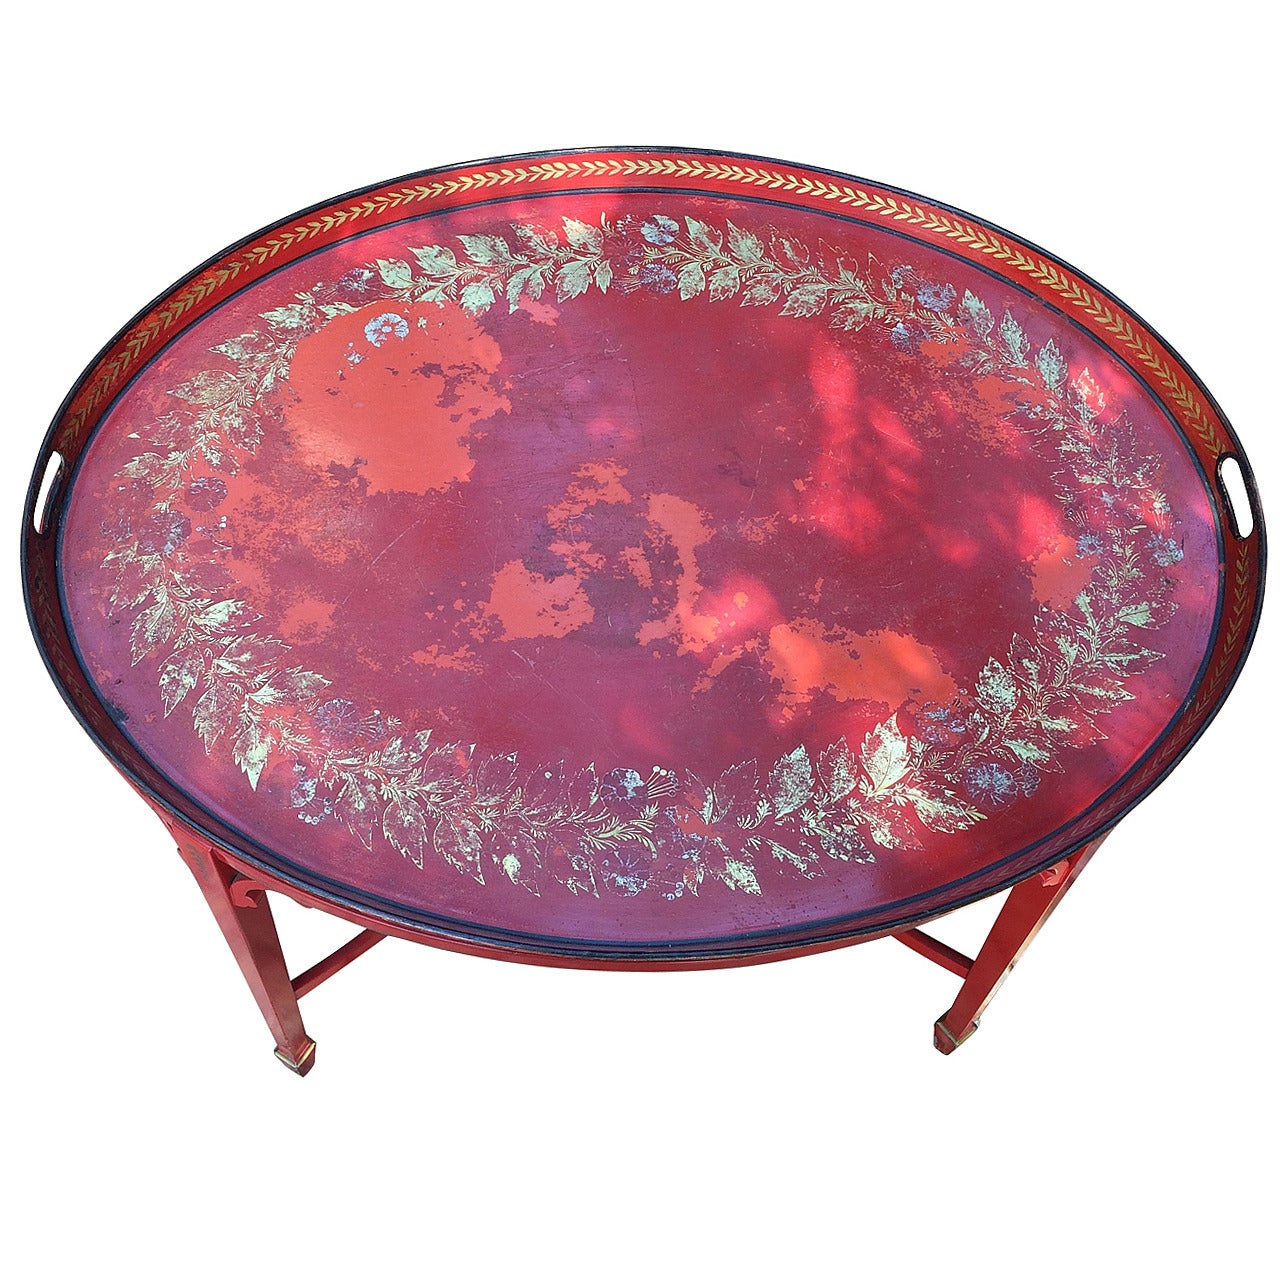 Empire Oval Red Tole Tray Table with Parcel Gilt